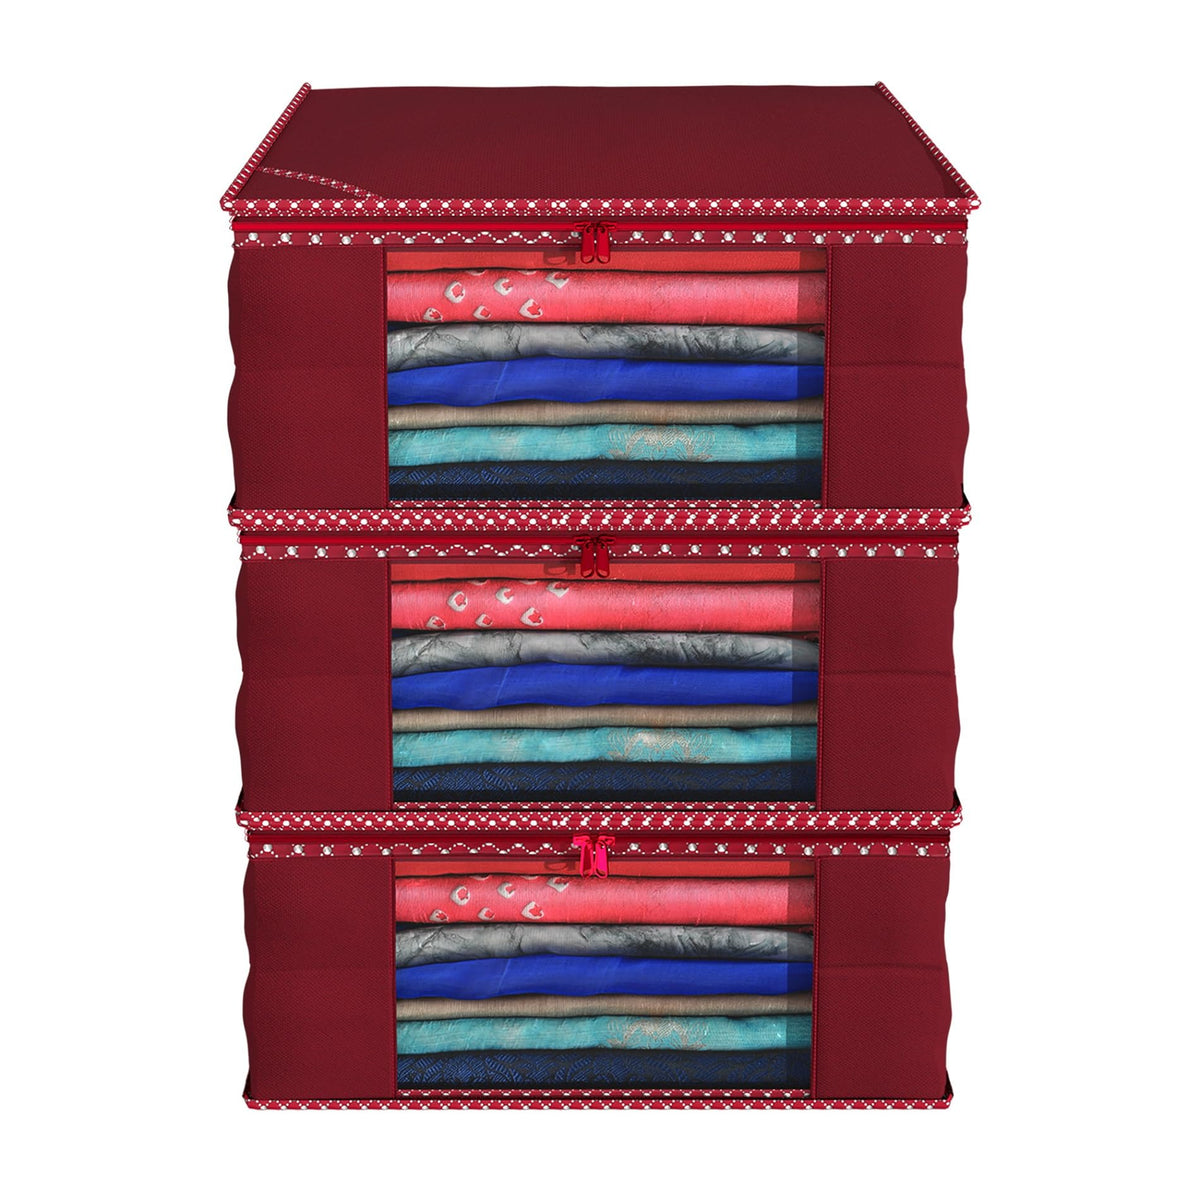 Kuber Industries Clothes Organizer For Wardrobe (Pack of 3) - Storage Organizer For Saree | Shirts | Salwar Suit | Lehenga - Dress Organizer For Wardrobe - Saree Covers With Zip (Maroon)